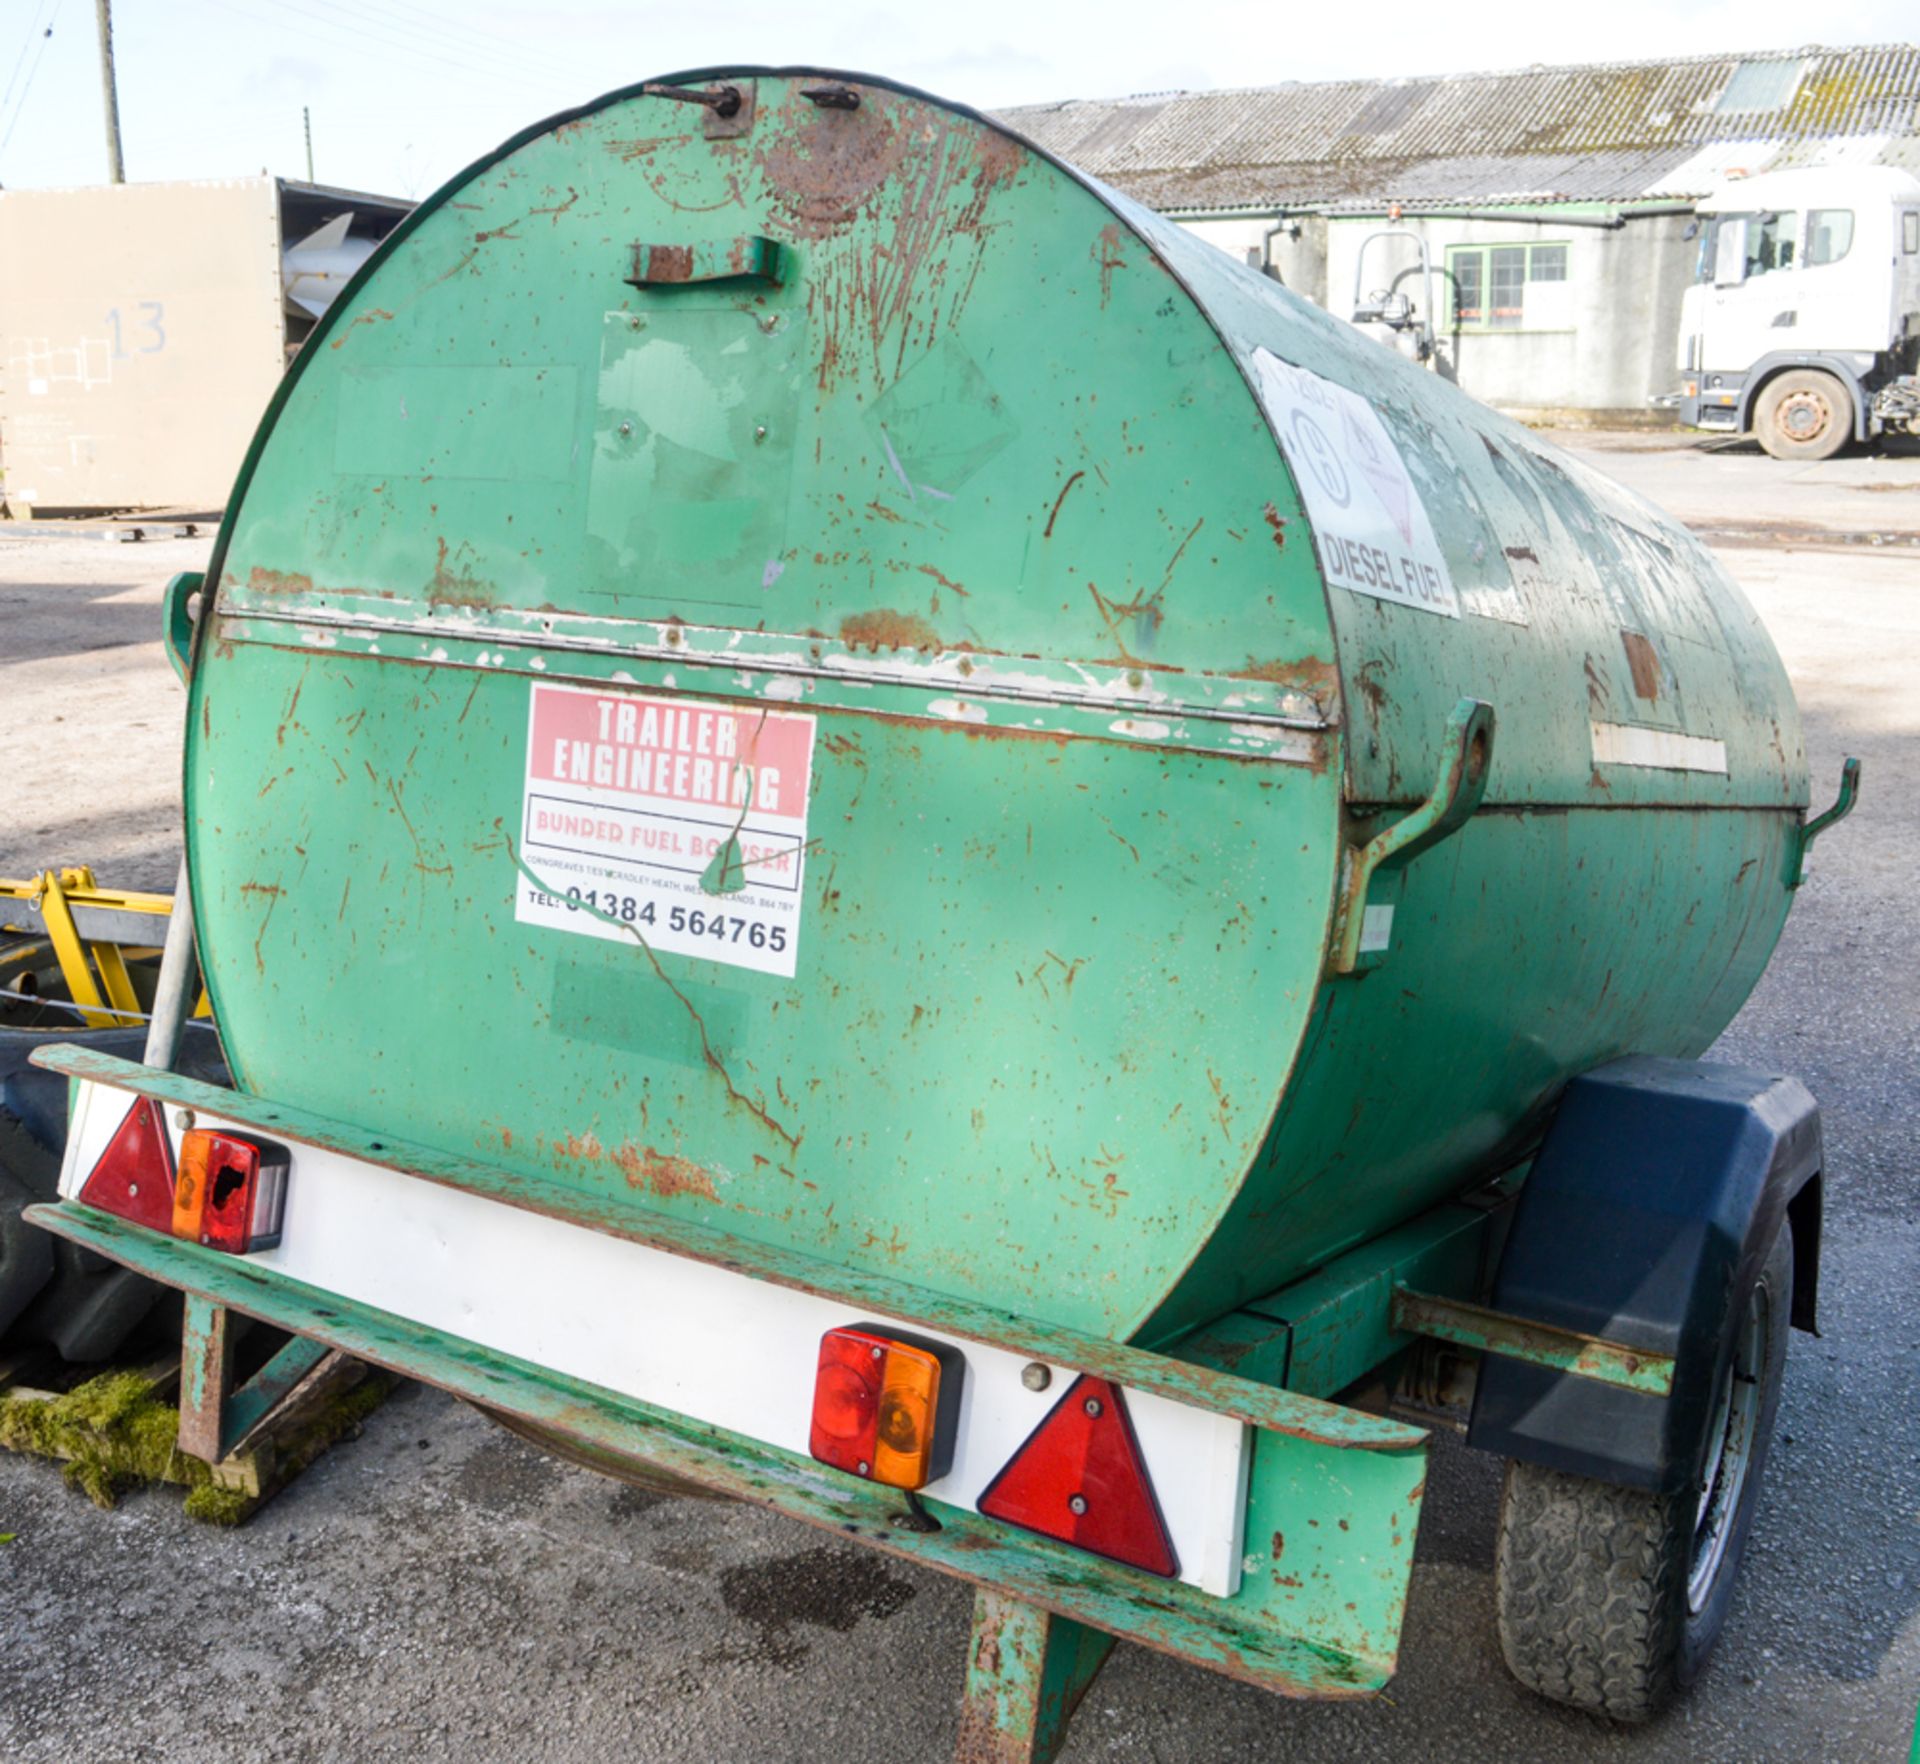 Trailer Engineering 250 gallon fast tow bunded fuel bowser c/w manual pump, delivery hose & nozzle - Image 2 of 3